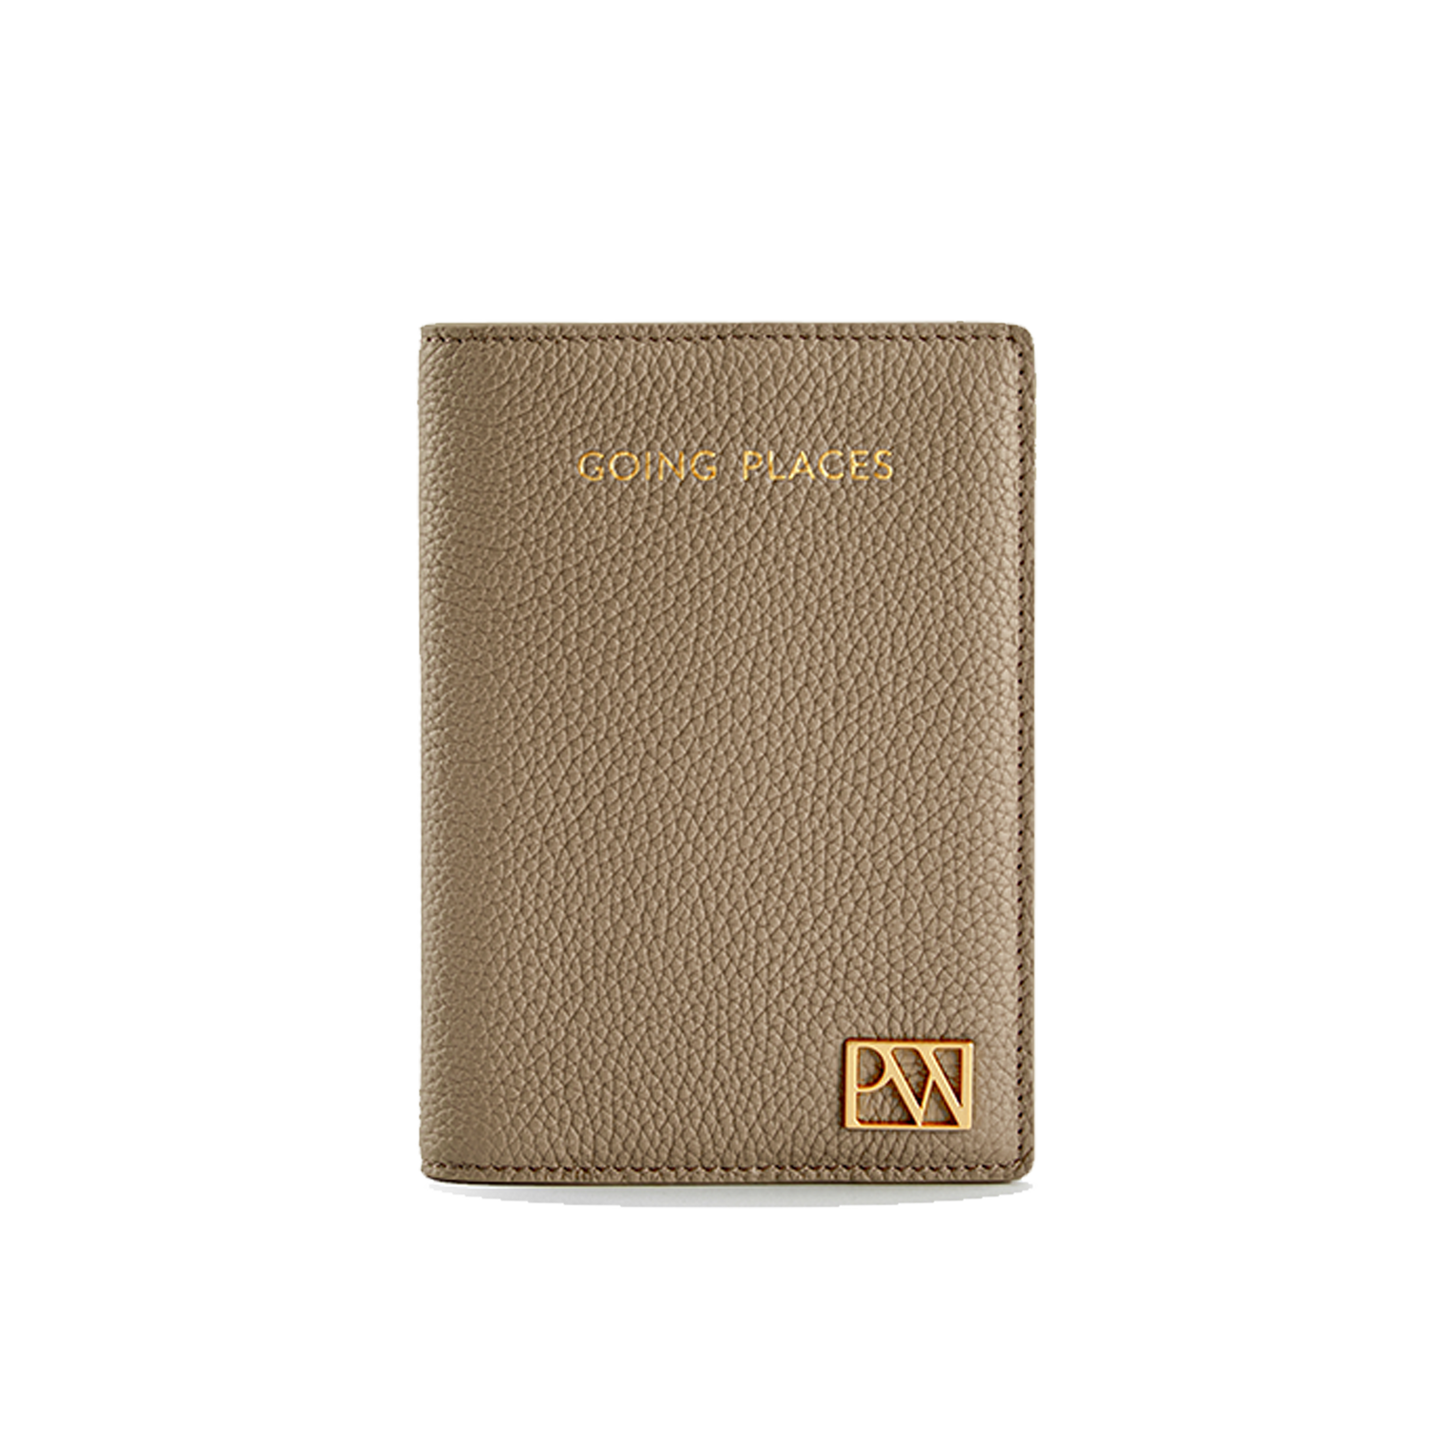 Going Places Passport Wallet